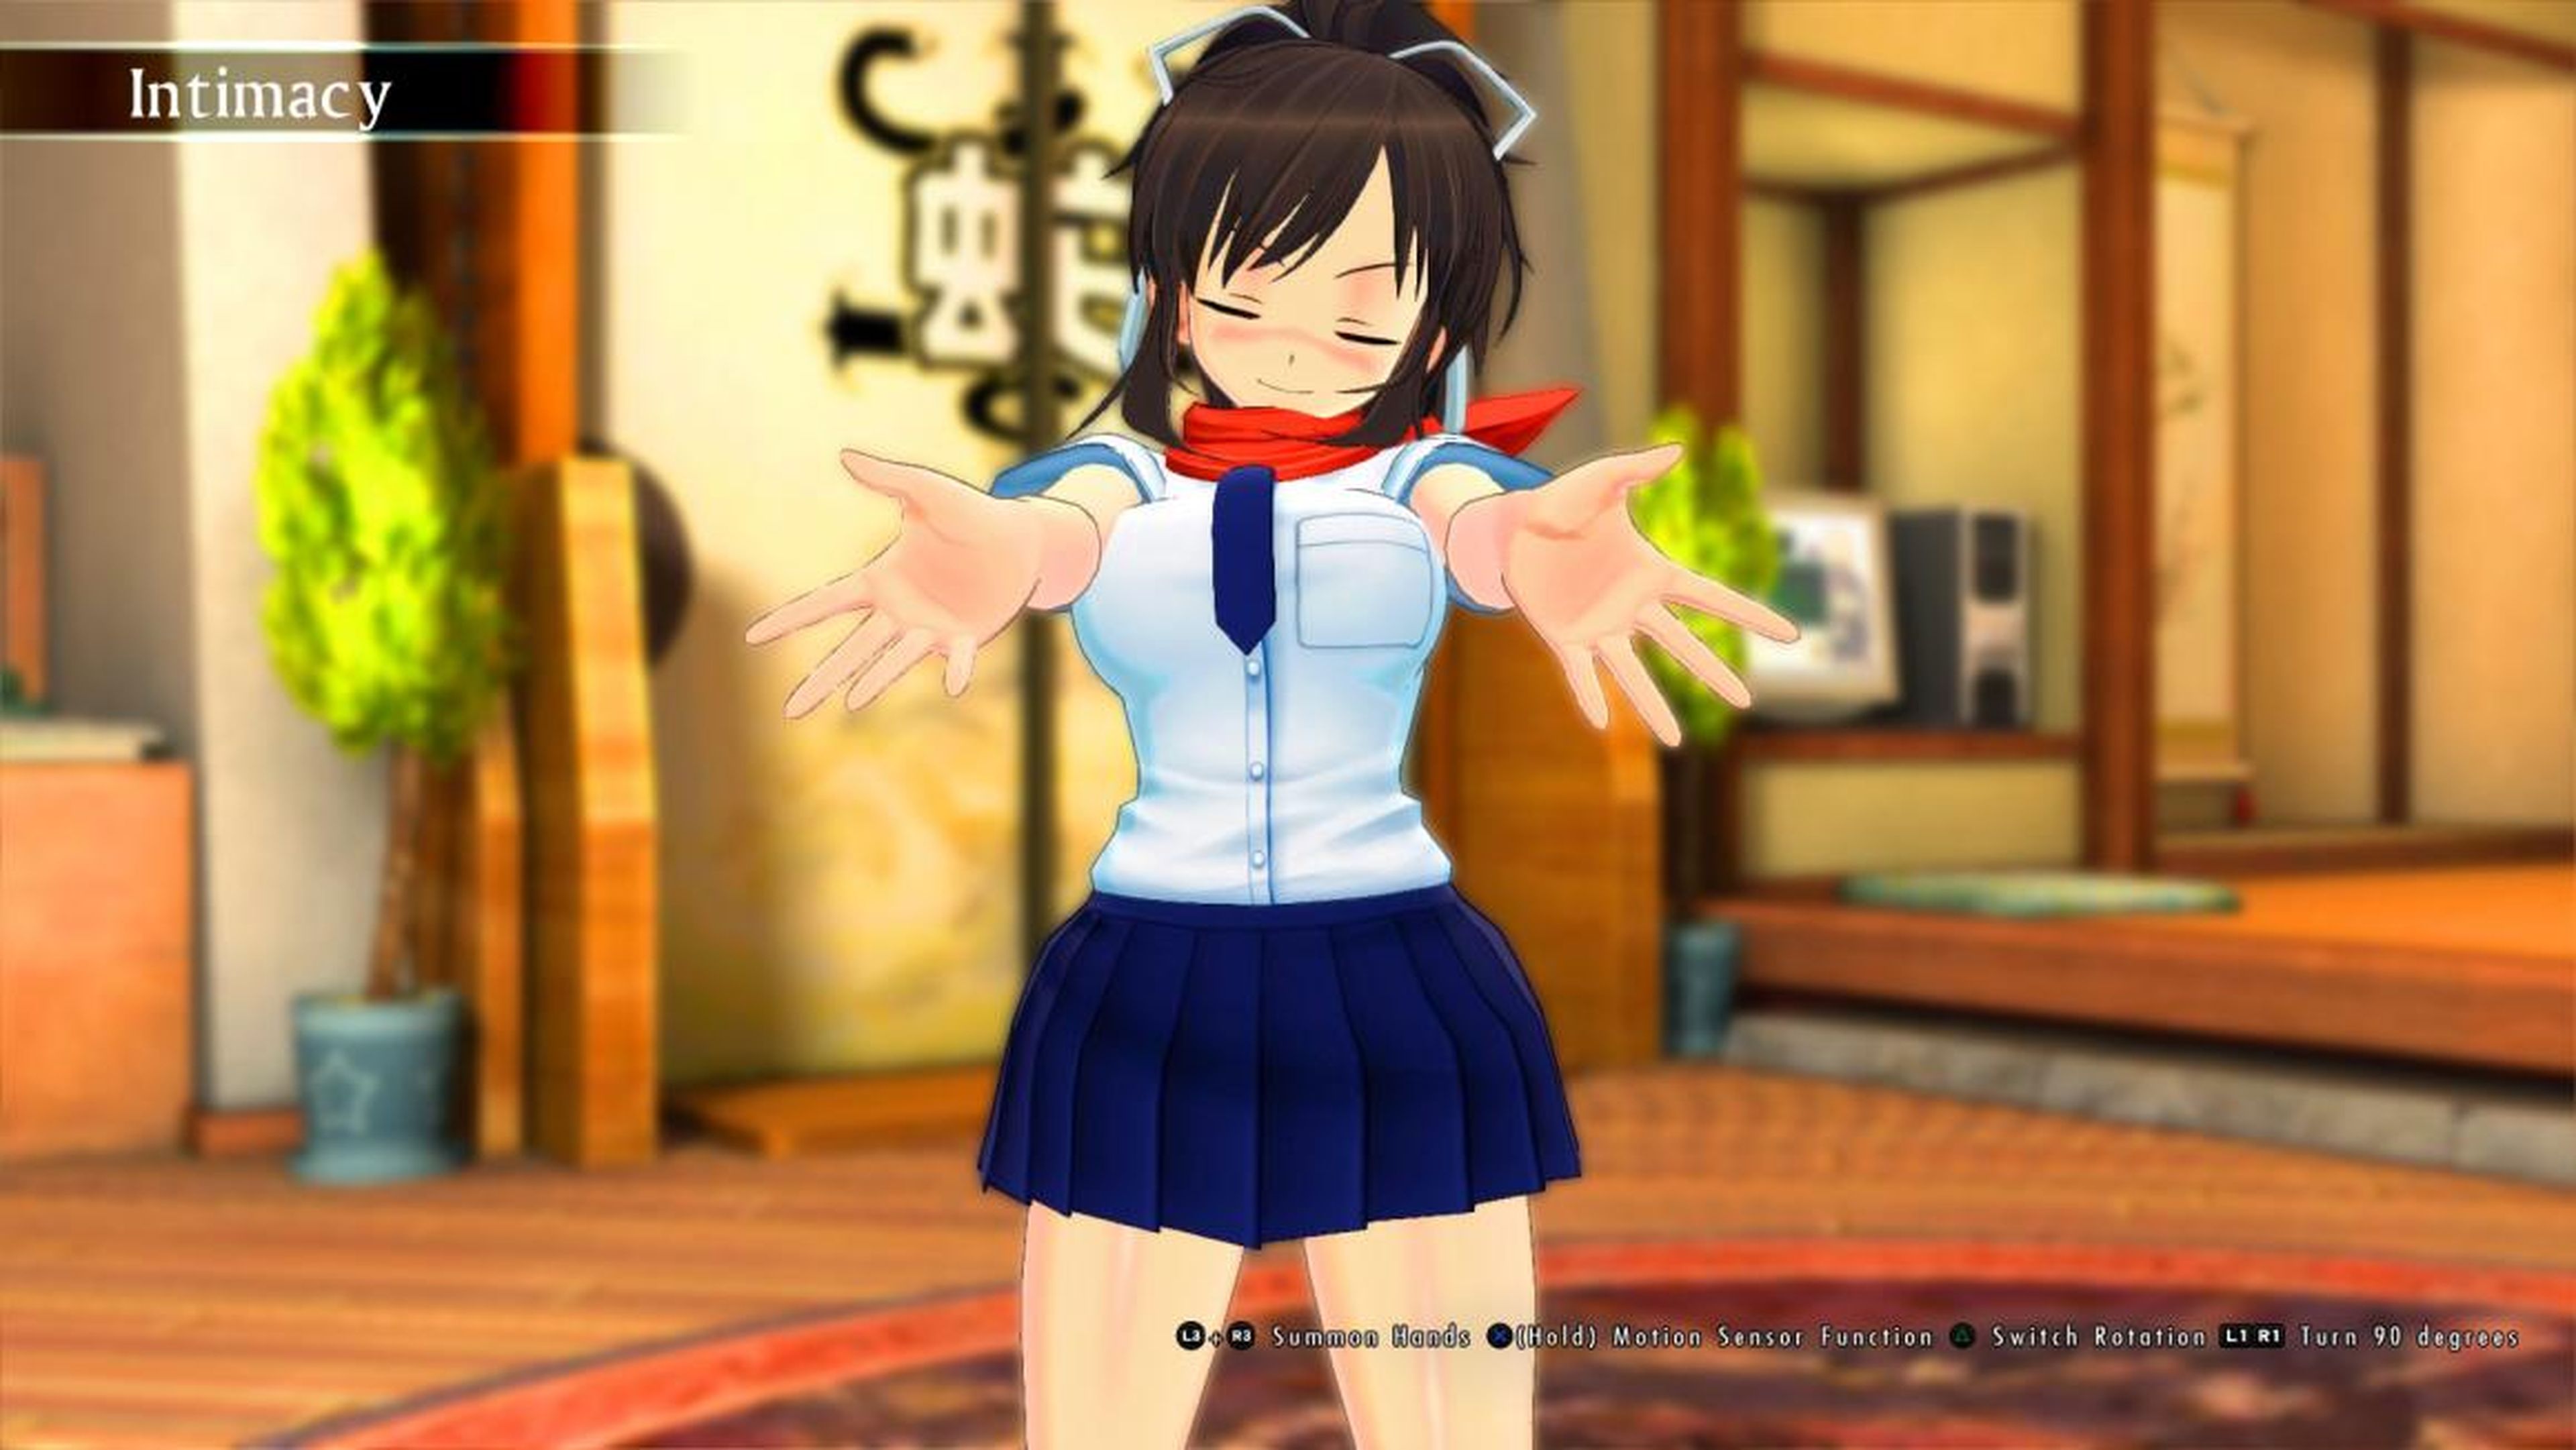 Last year Sony made the publishers of "Senran Kagura Burst Re:Newel" remove Intimacy Mode before the game was released in Western markets. Intimacy Mode lets players grope and undress the game's female characters.